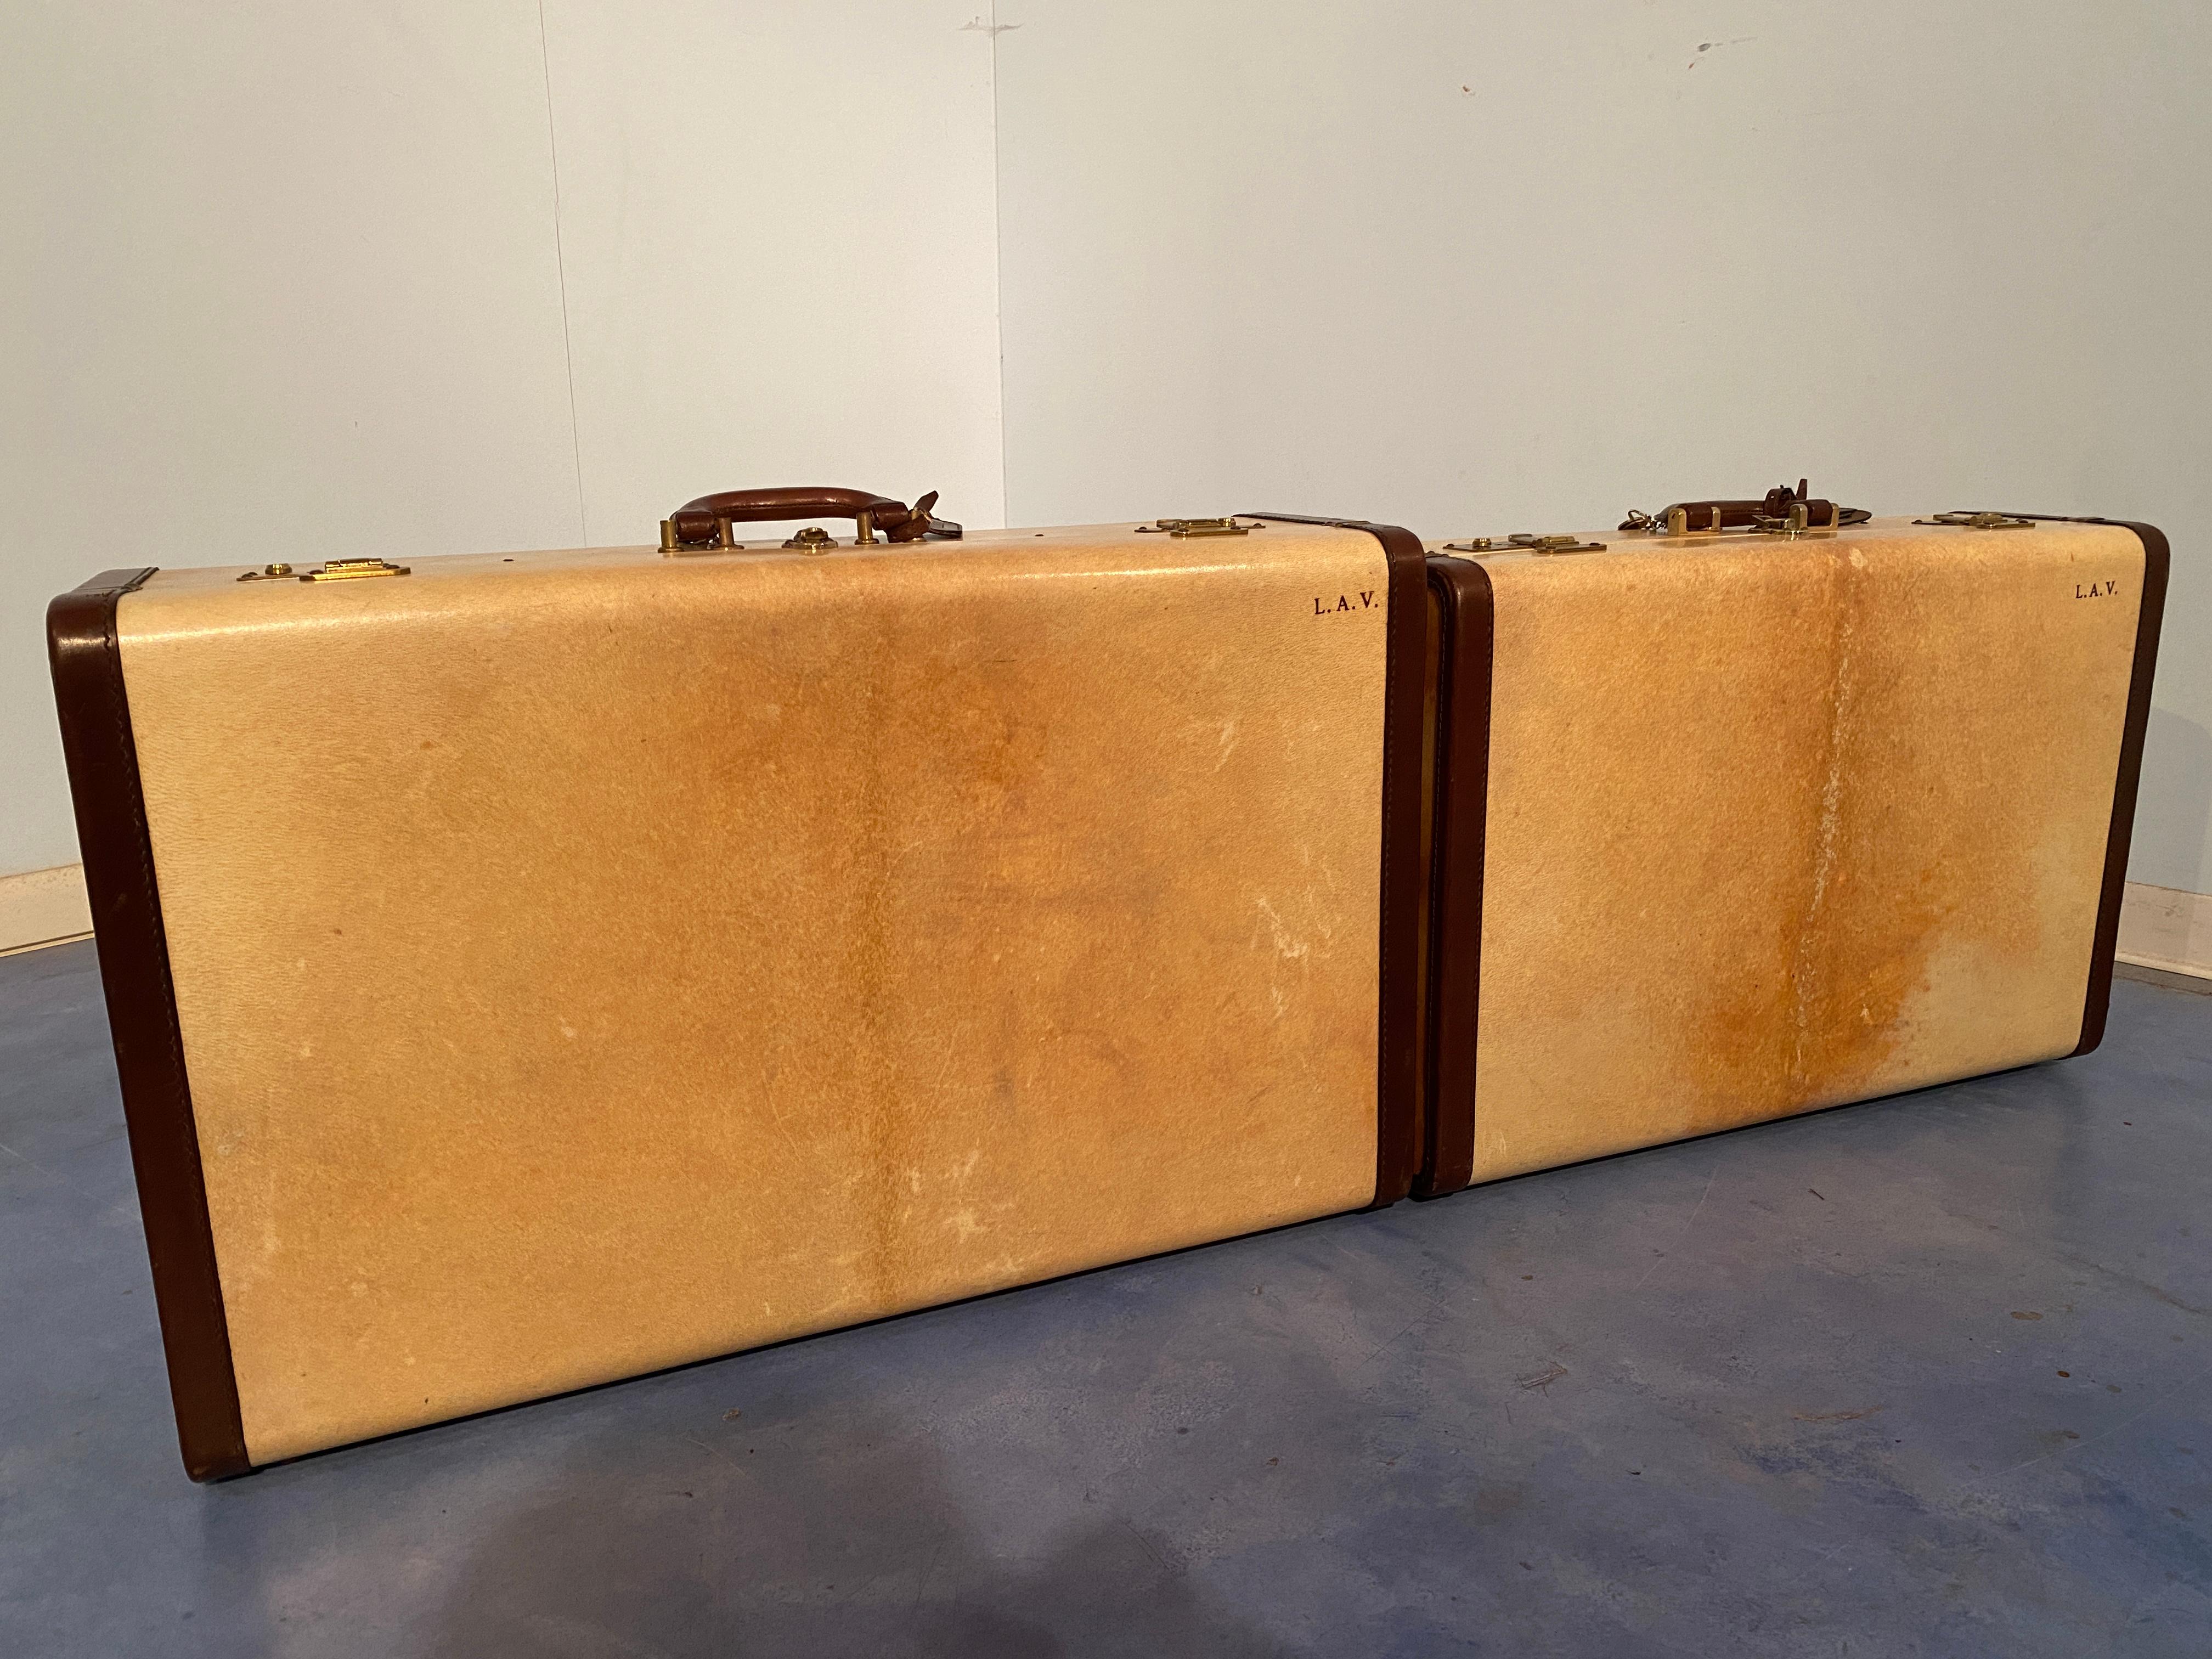 Italian Mid-Century Modern Parchment Paper Luggages or Suitcases Set of Two 1960 For Sale 3